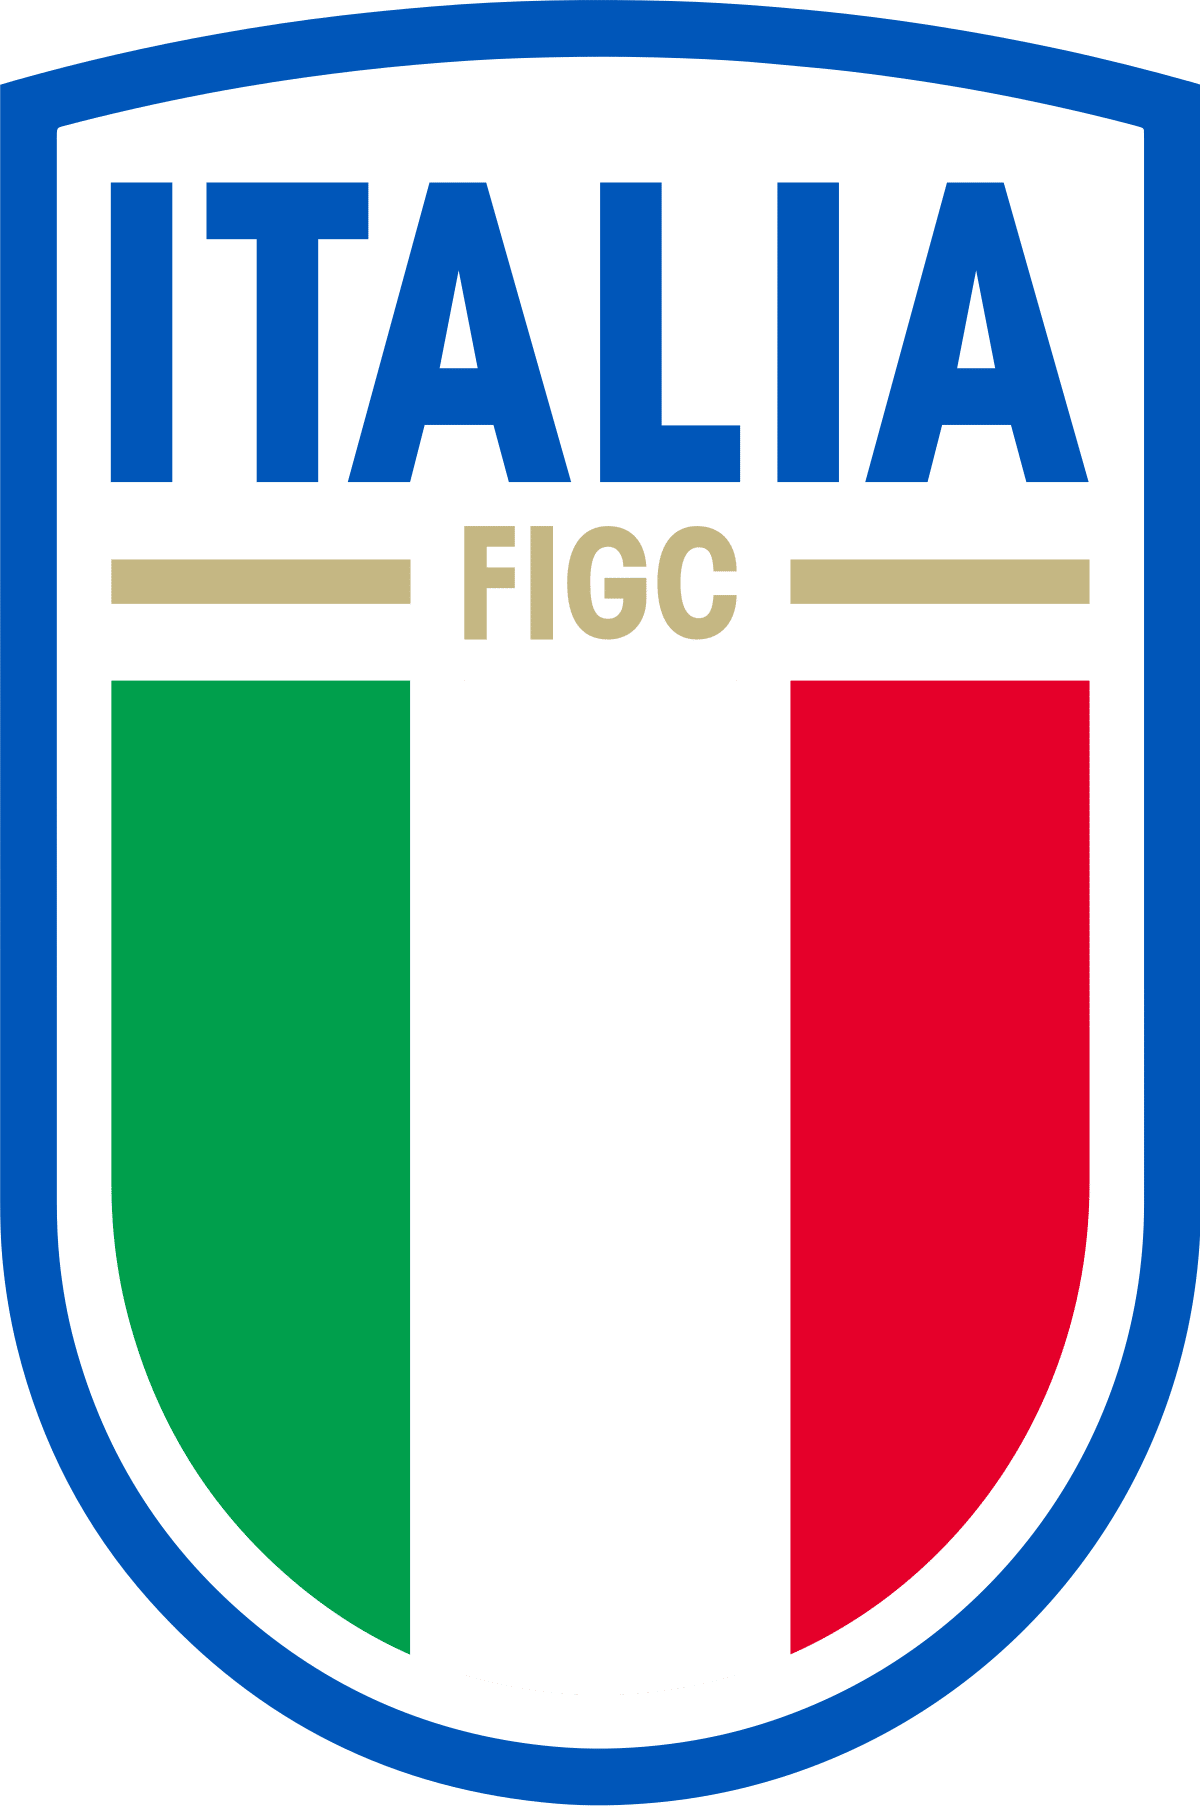 The badge of Italy